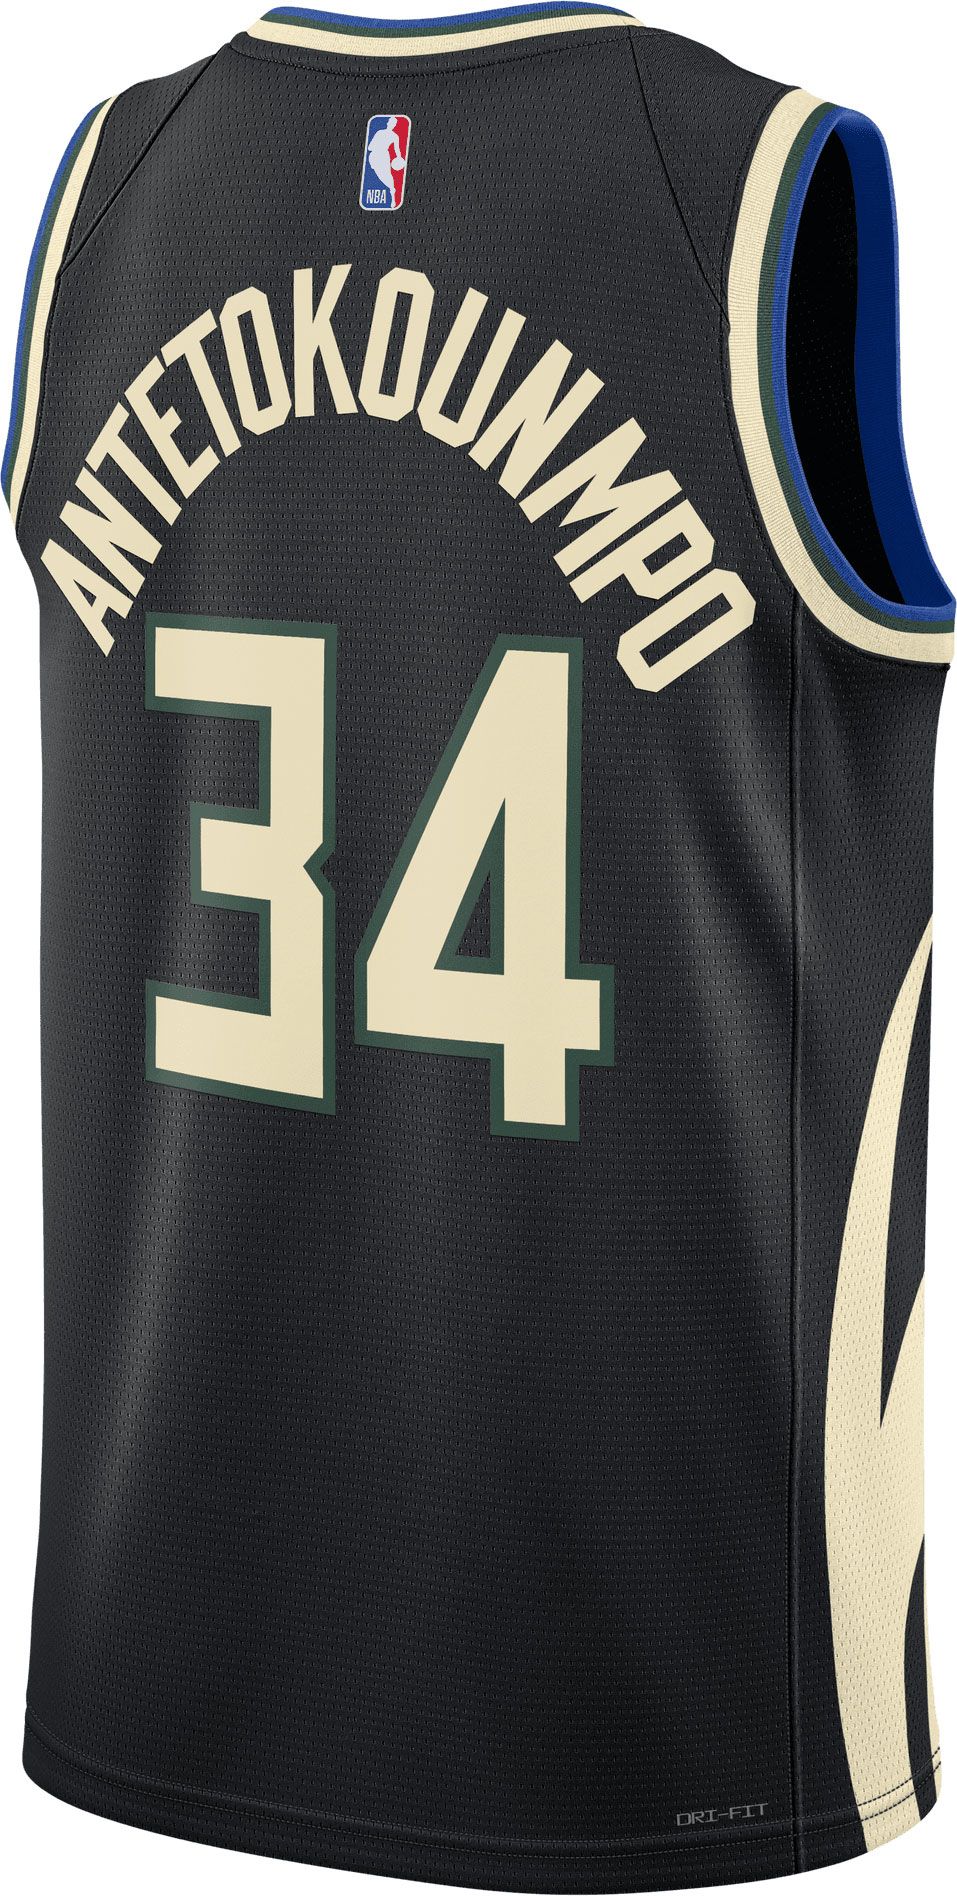 giannis antetokounmpo jersey not signed